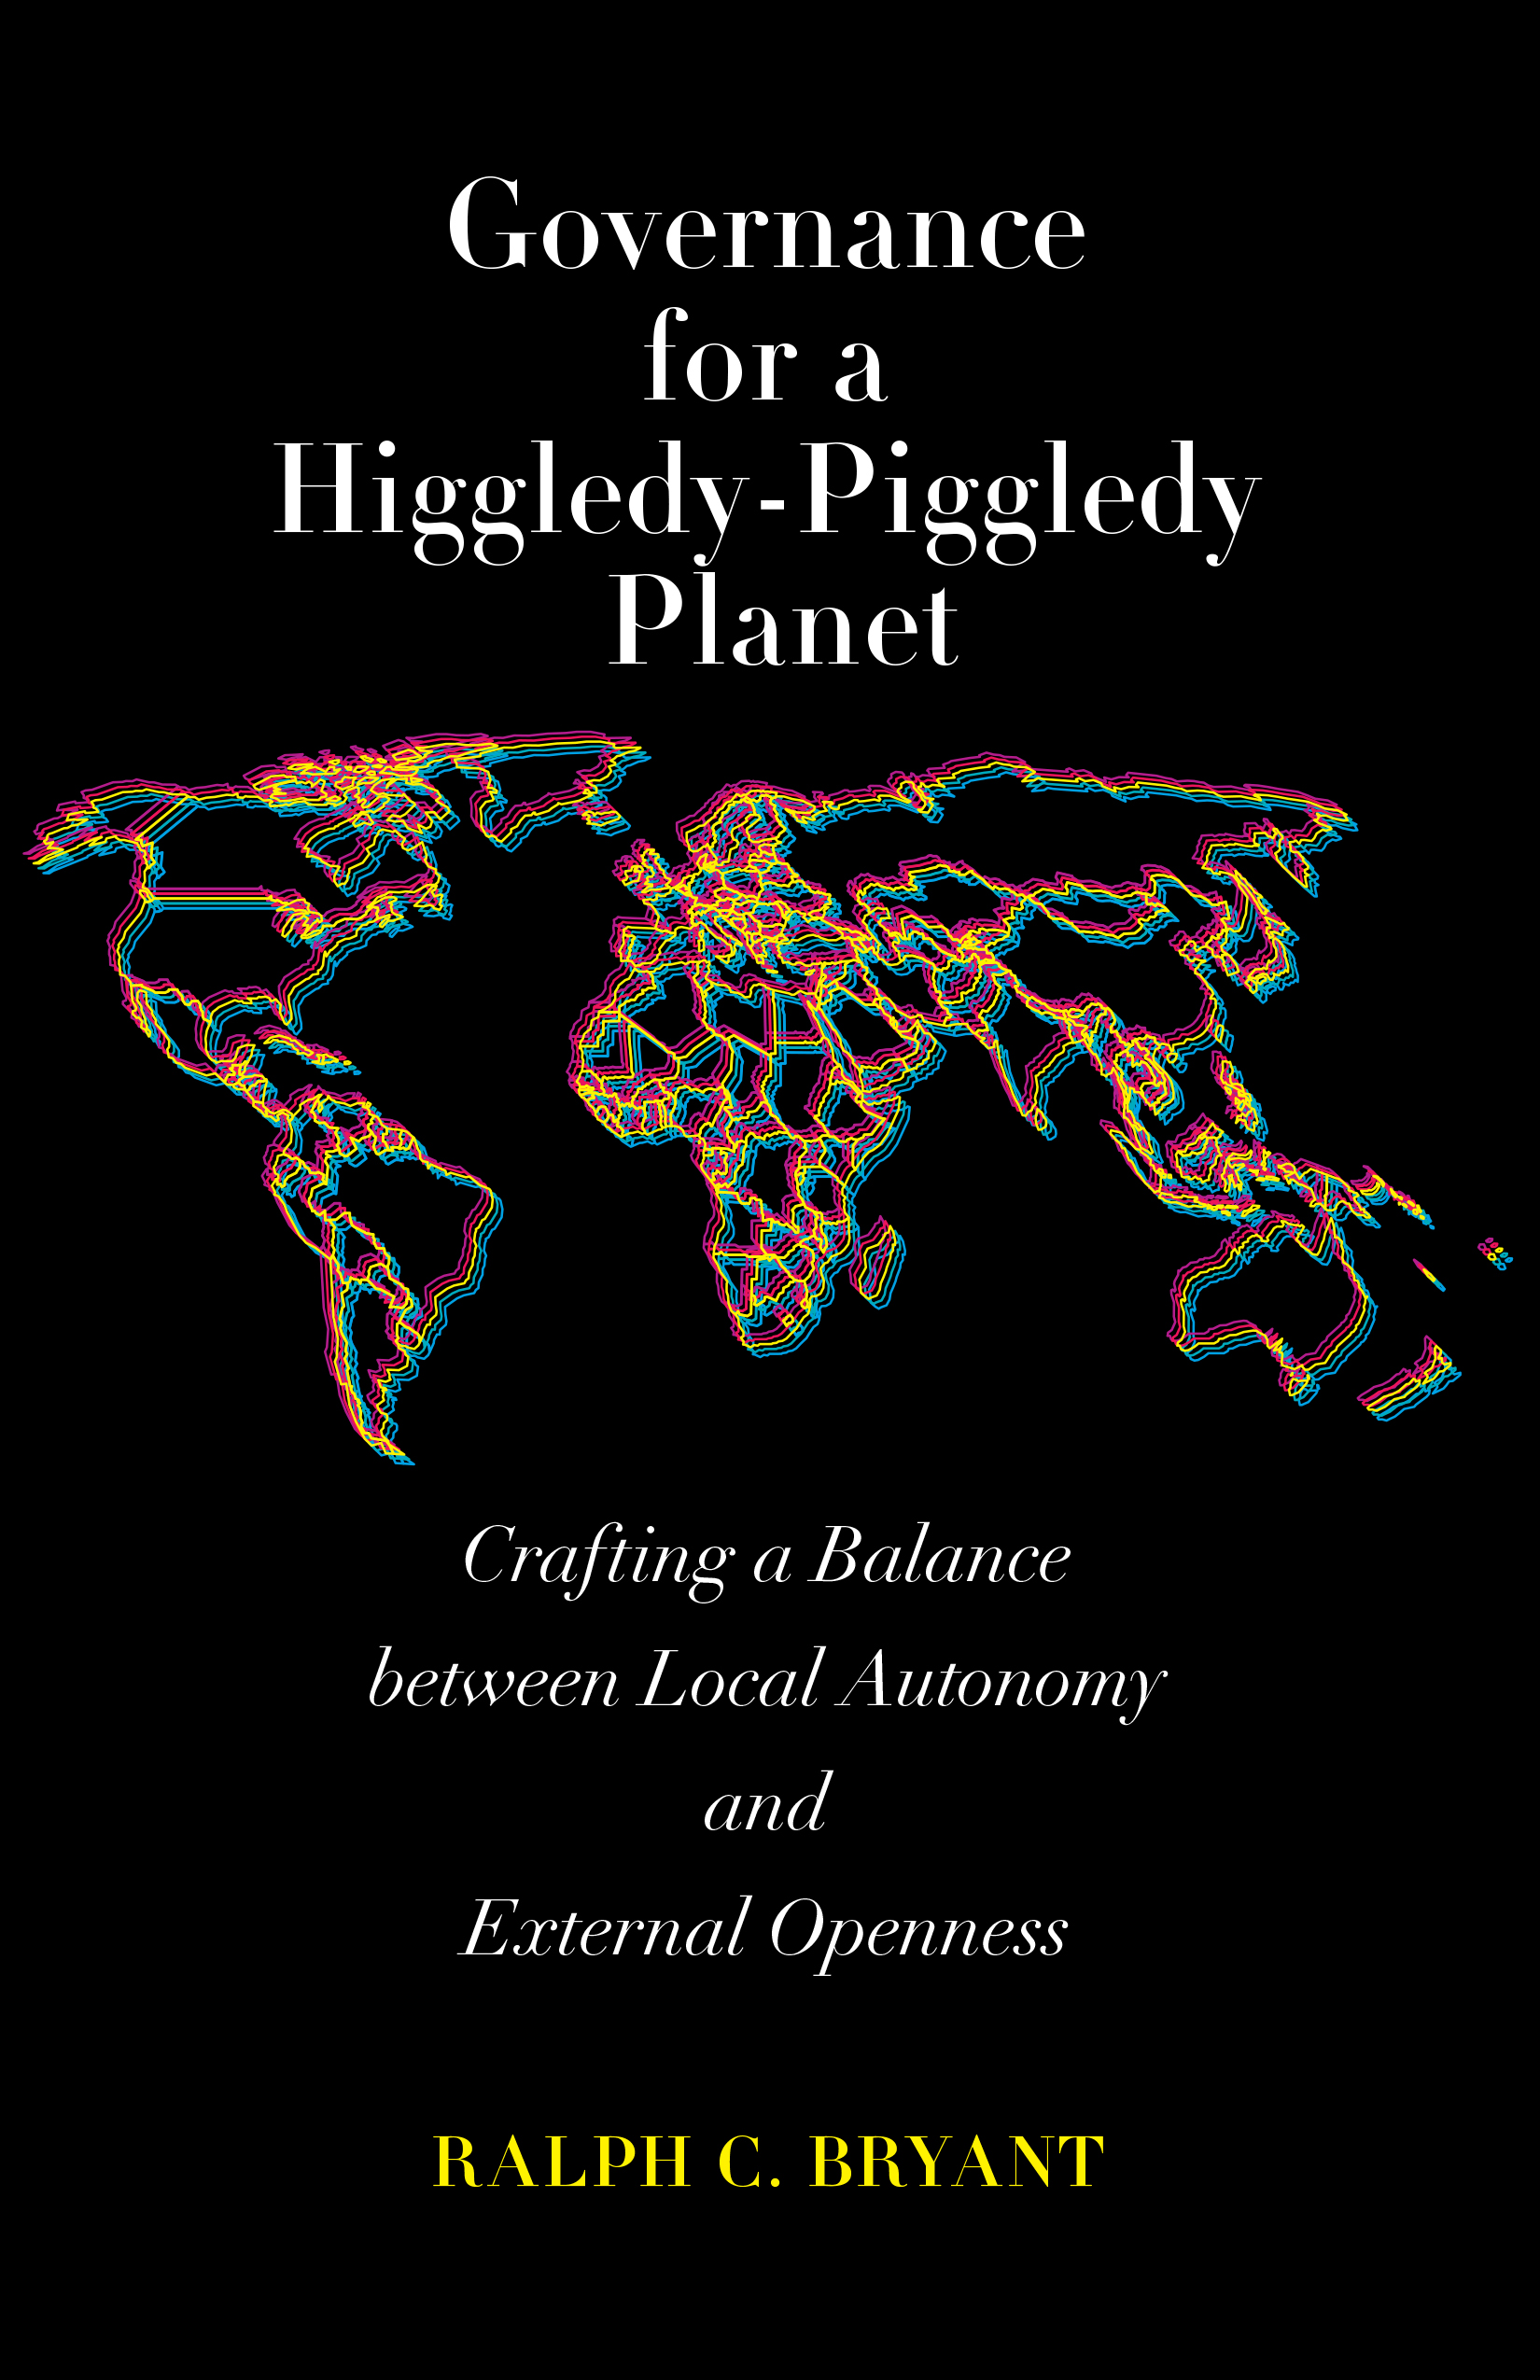 Governance for a Higgledy-Piggledy Planet: Crafting a Balance between Local Autonomy and External Openness